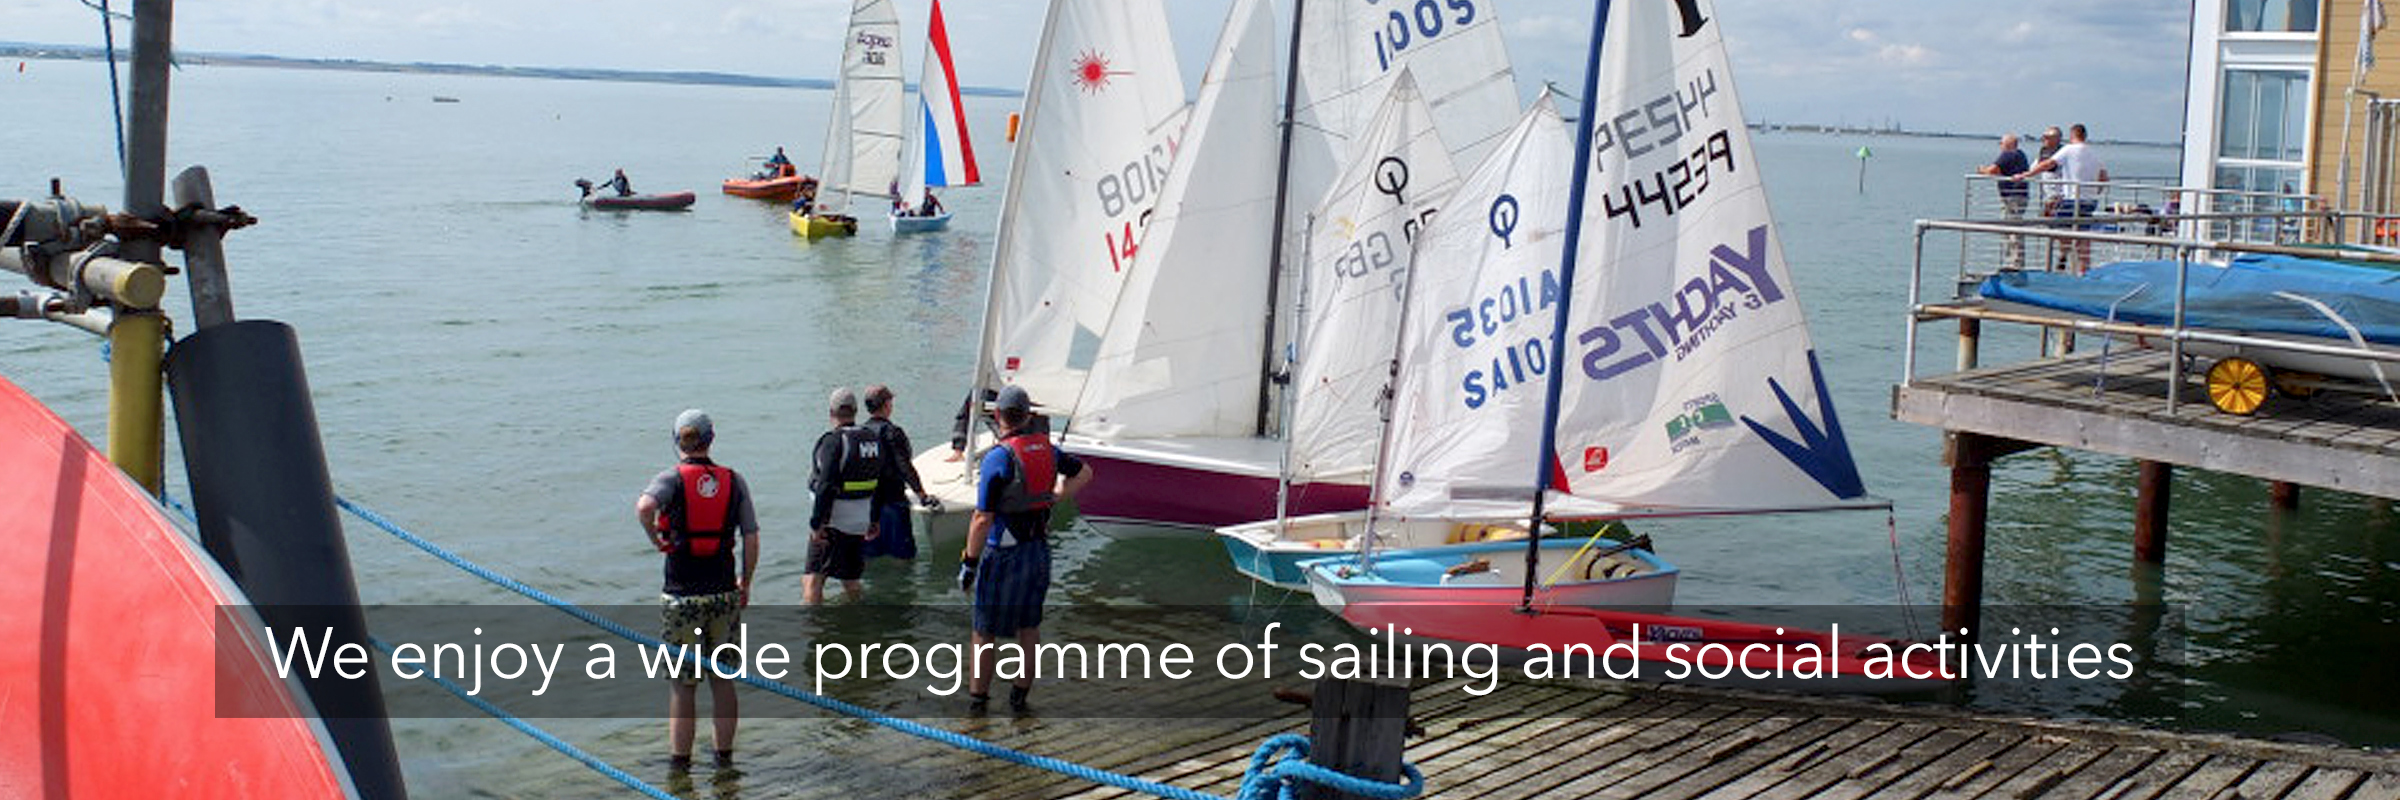 Permalink to:We enjoy a wide programme of sailing and social activities